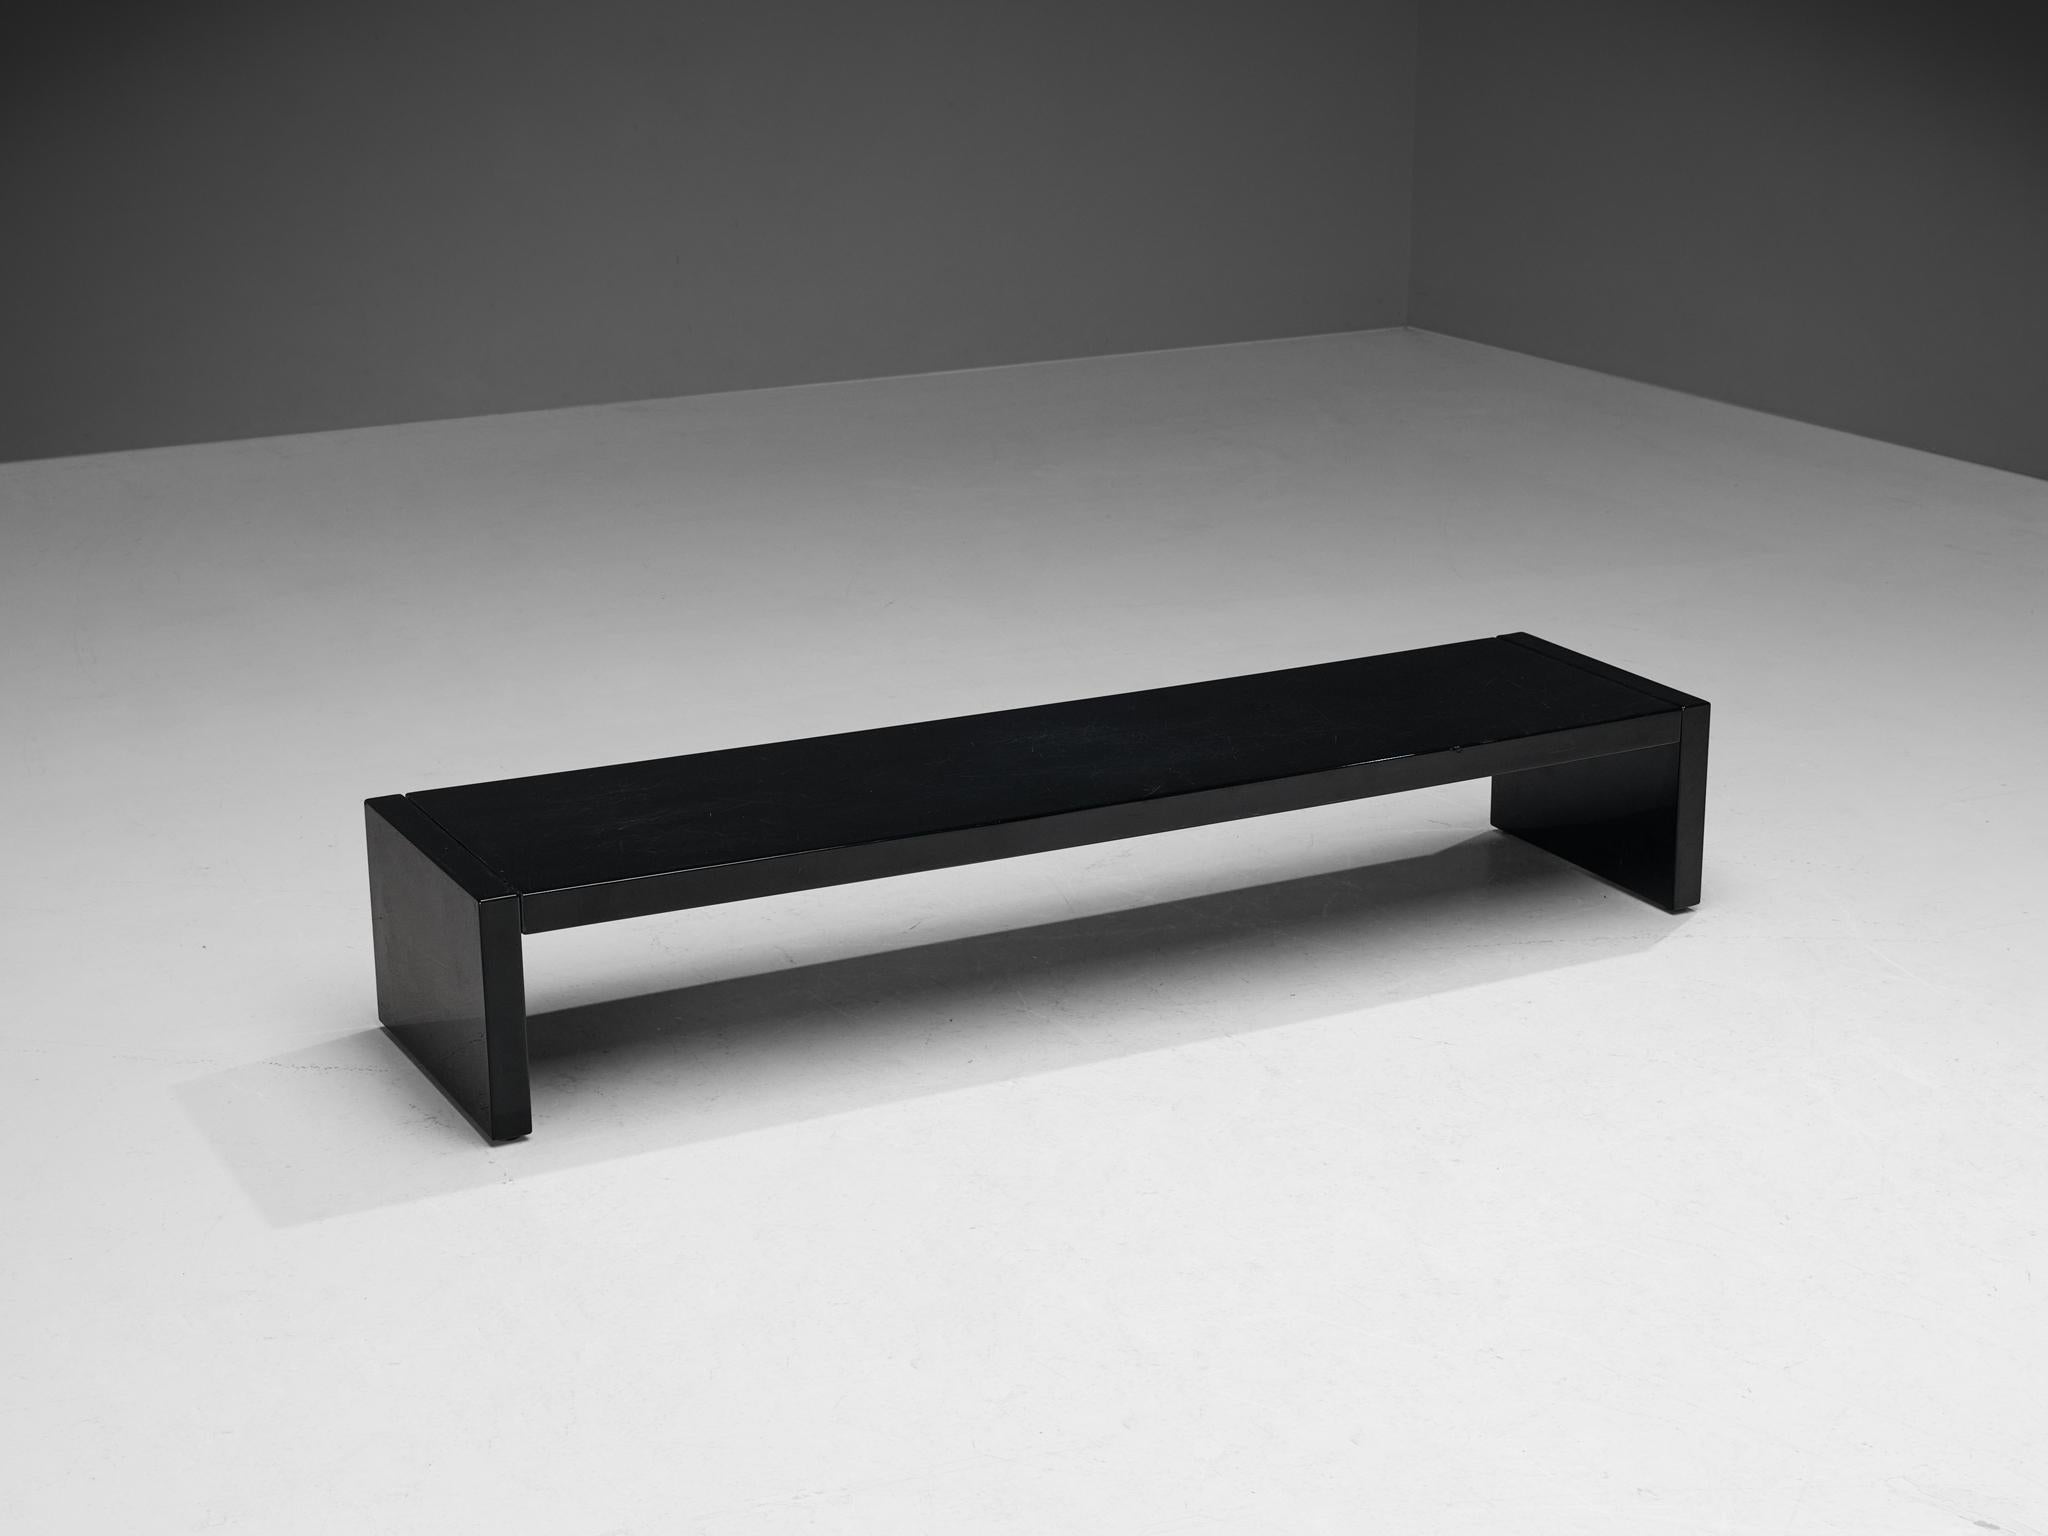 Massimo and Lella Vignelli for Poltronova, coffee table, lacquered wood, 1960s.

A strong structured rectangular coffee table in luscious high gloss black lacquer. The table consists of three equally thick and sturdy parts of lacquered wood that